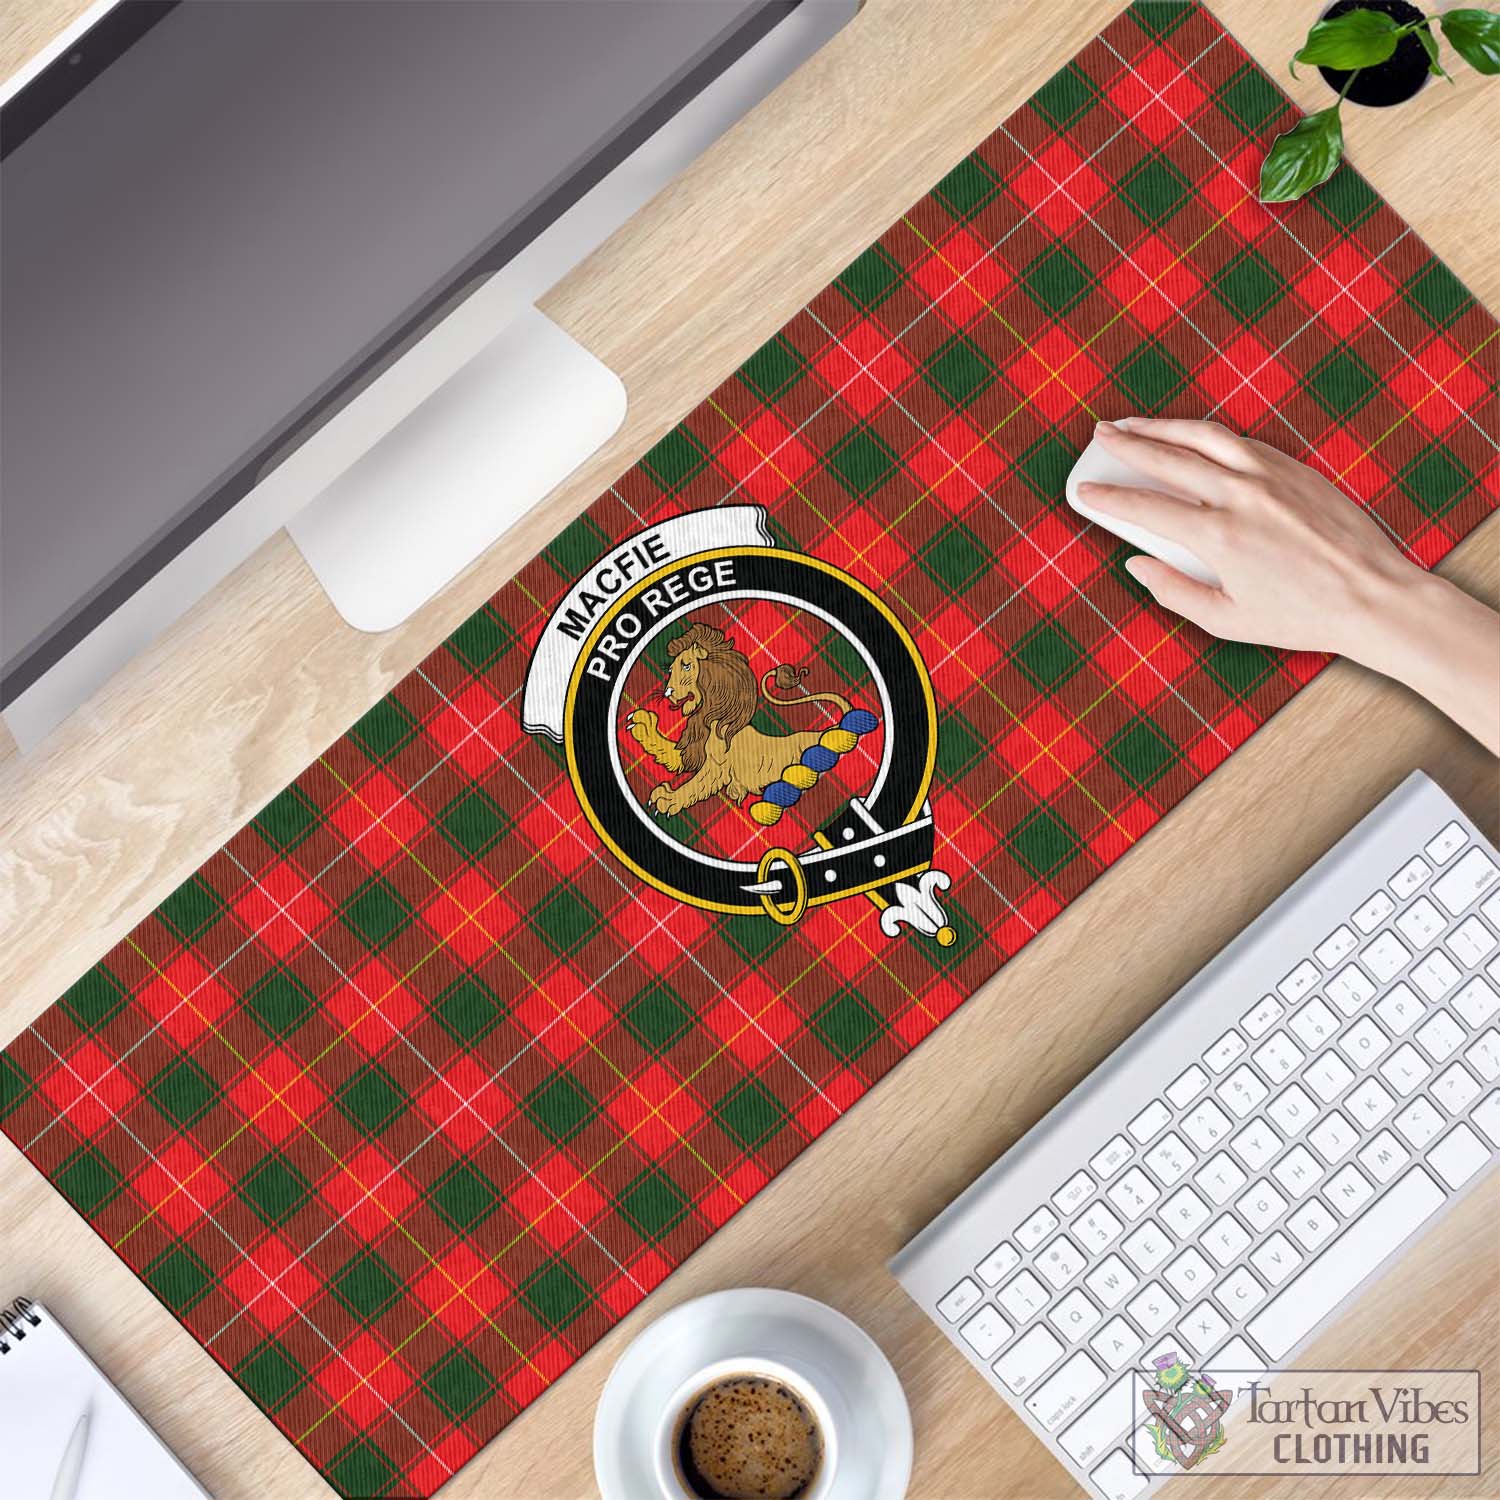 Tartan Vibes Clothing MacFie Modern Tartan Mouse Pad with Family Crest